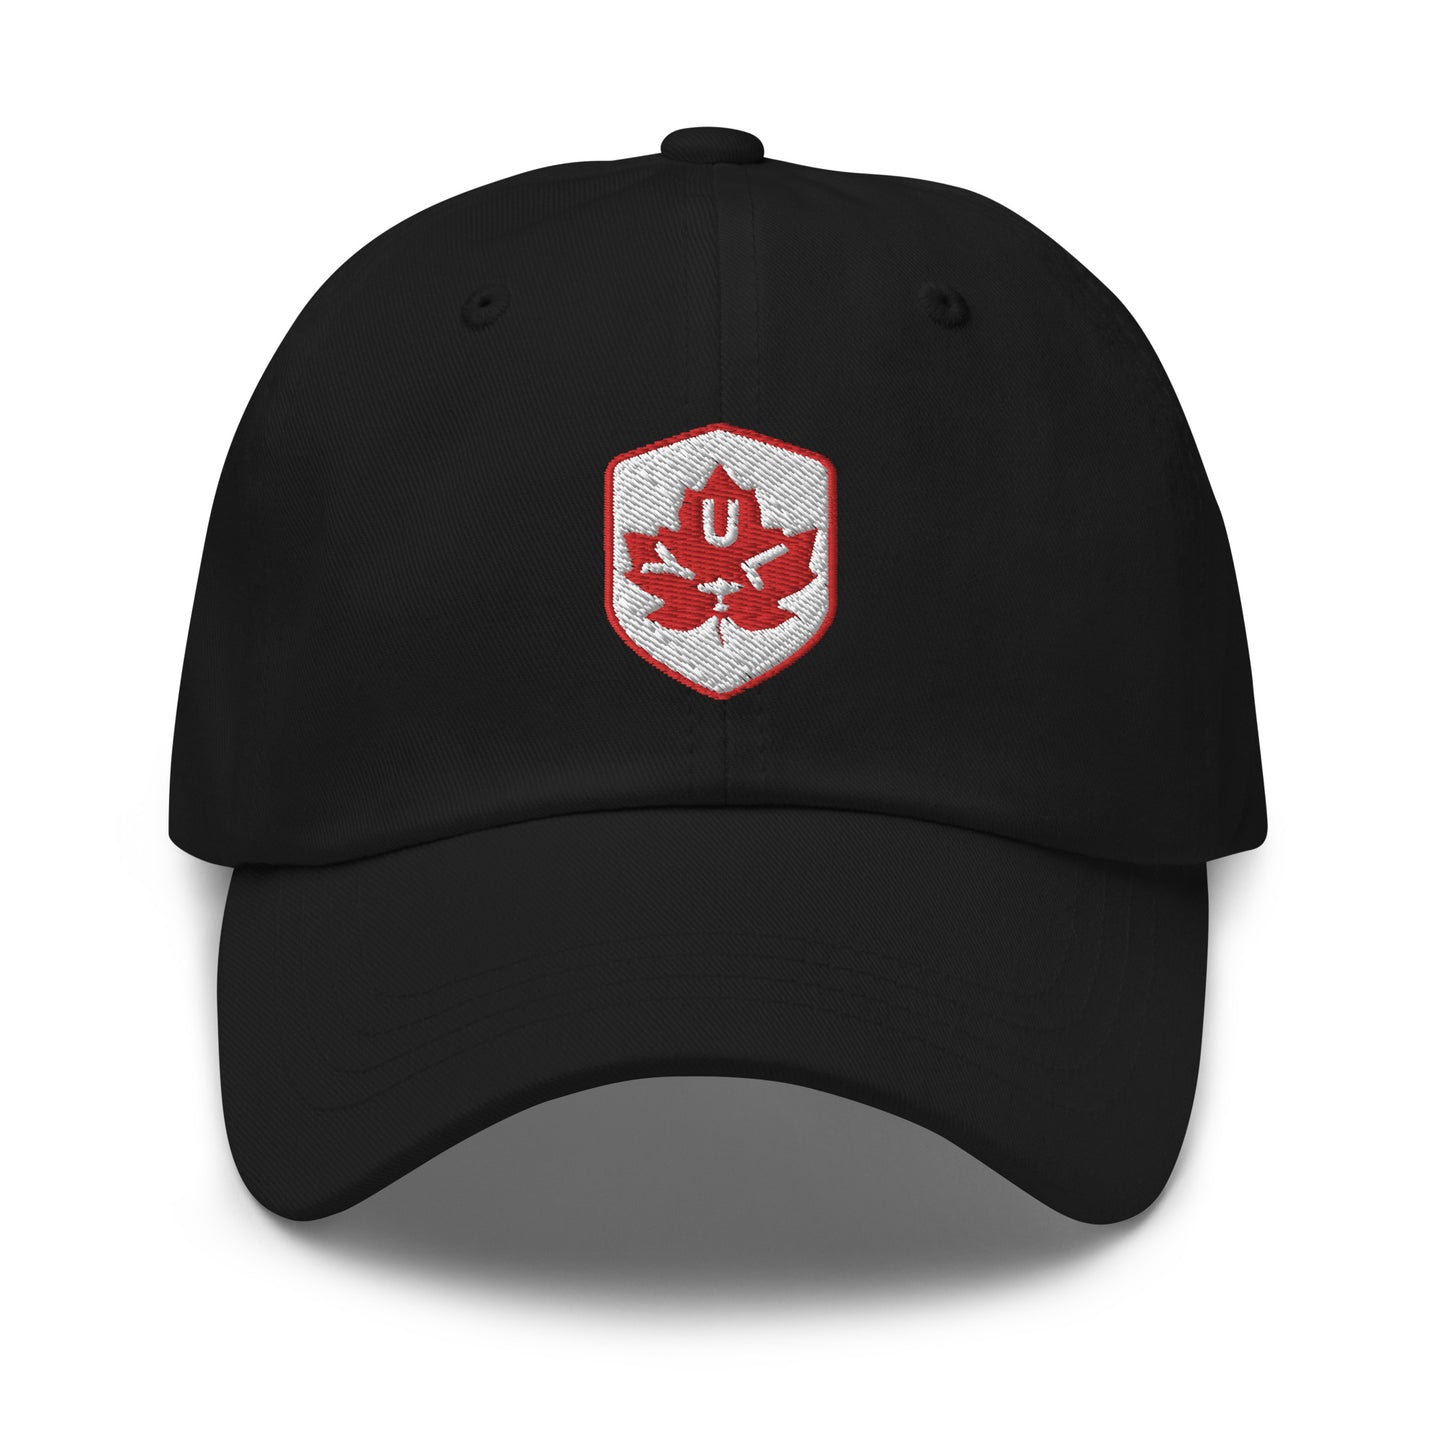 Maple Leaf Baseball Cap - Red/White • YUL Montreal • YHM Designs - Image 11